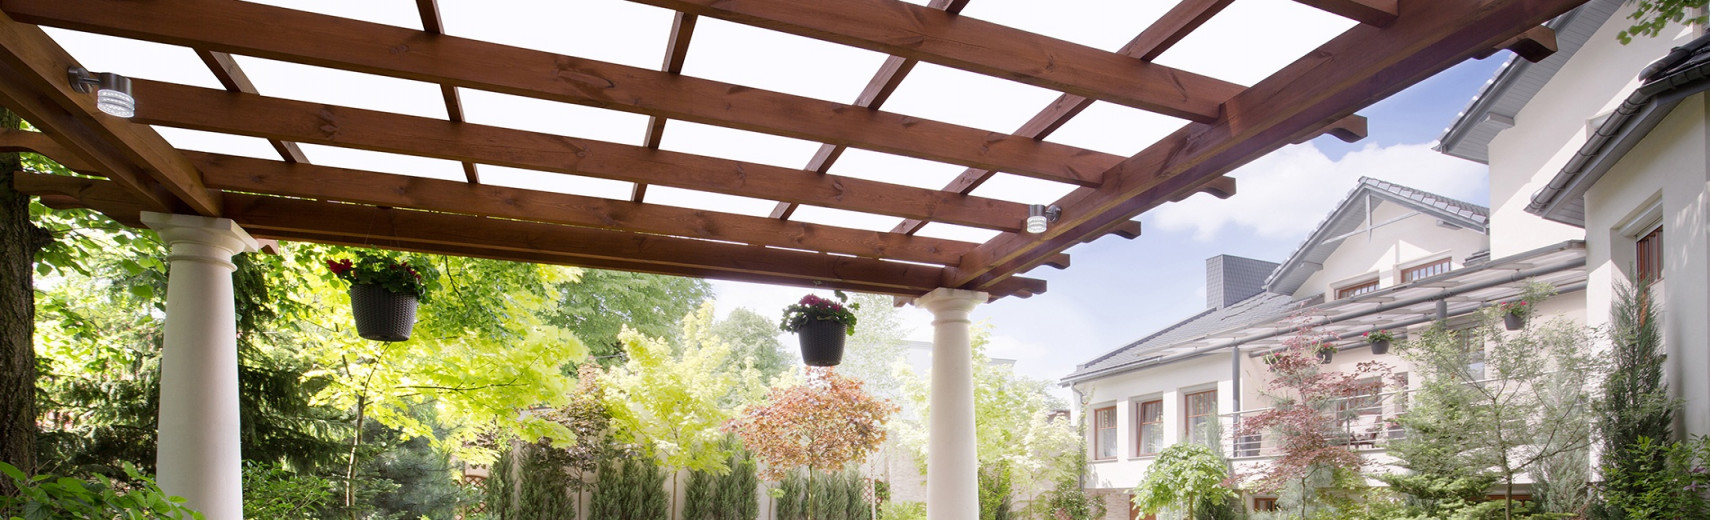 SUNSCAPE Roof Panels: PVC Roof Covering for Patio, Pergola & More